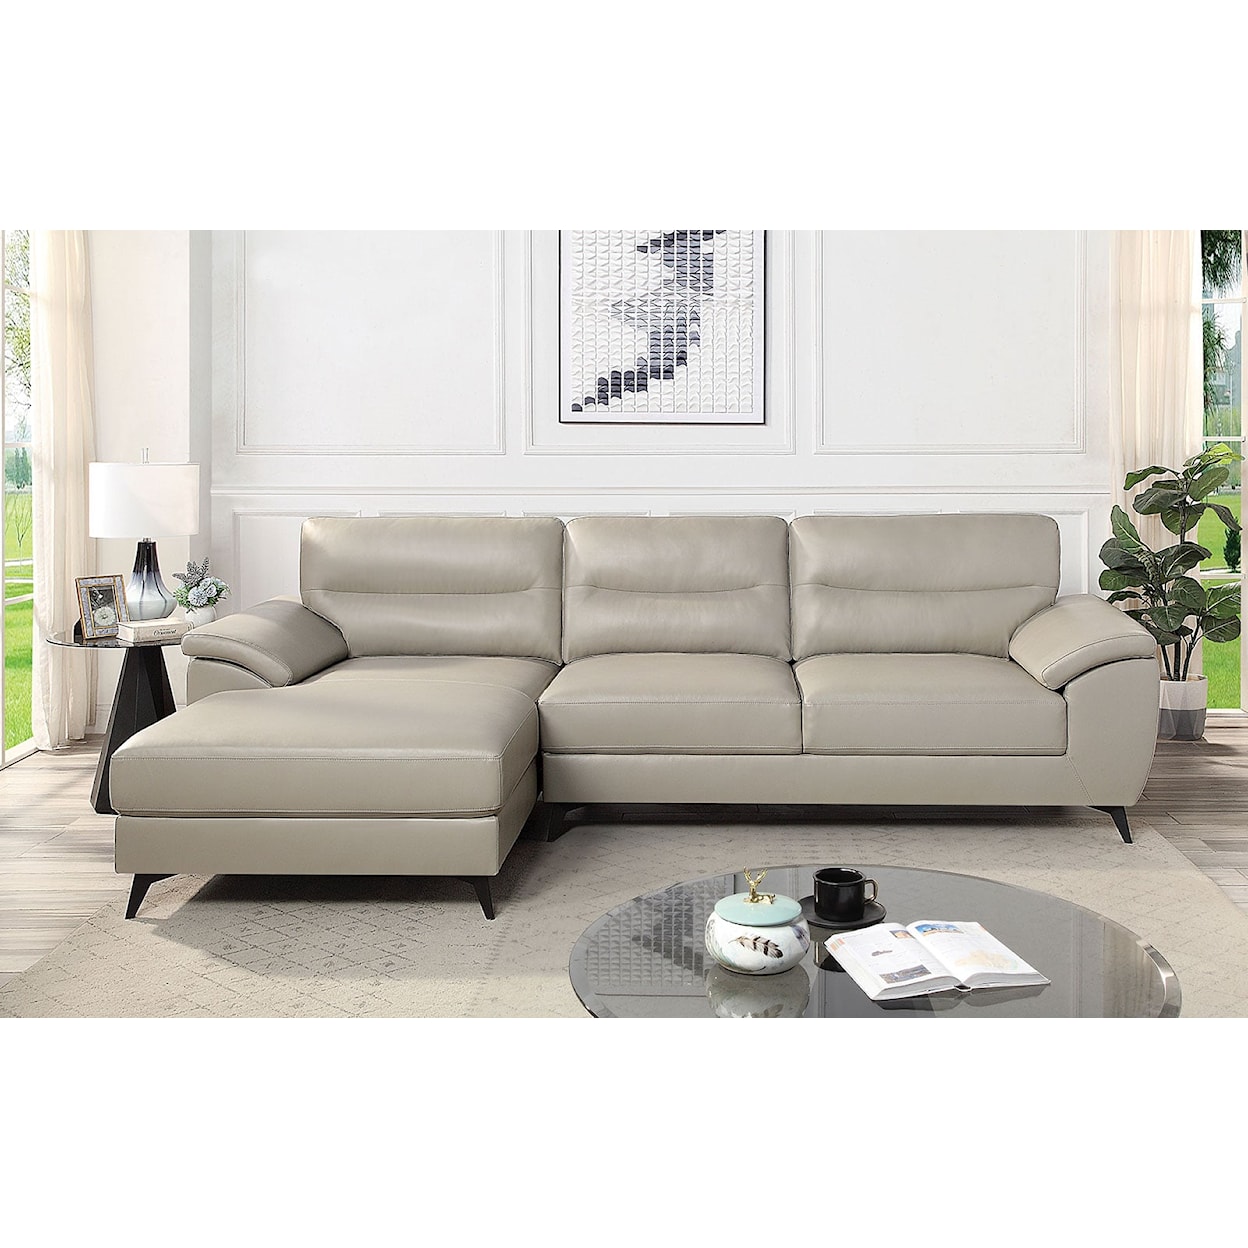 Furniture of America MOHLIN Stationary Sectional Sofa